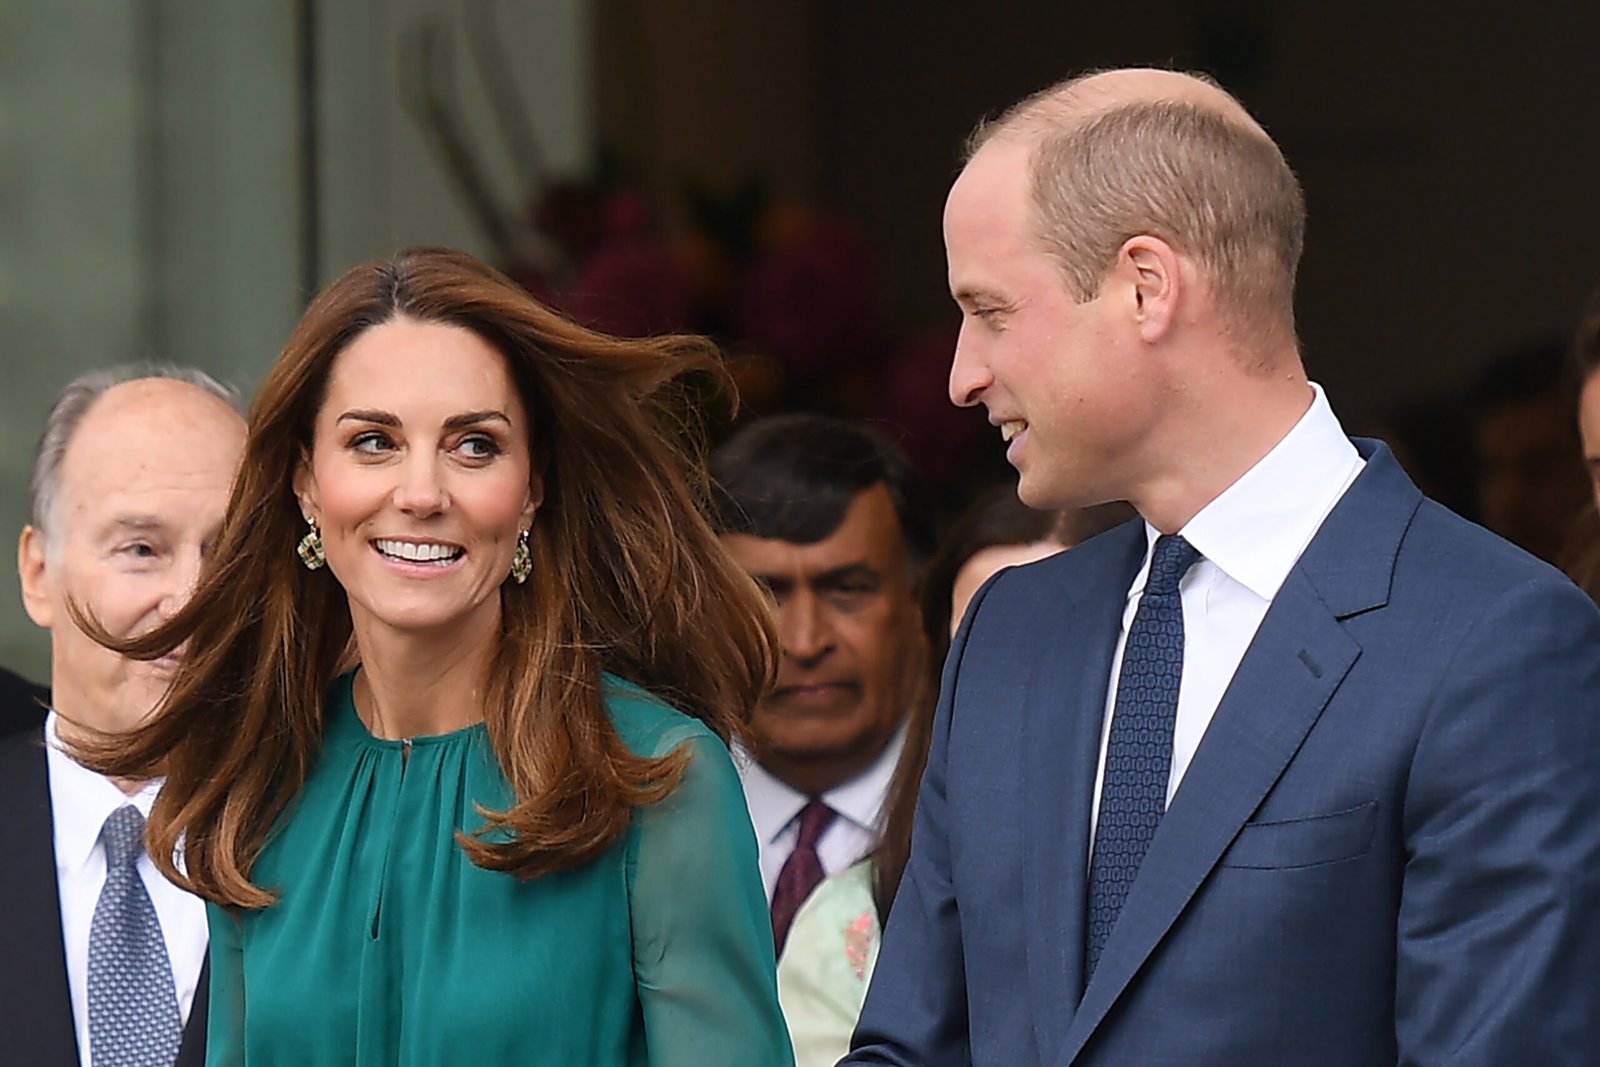 In love like never before: Prince William and Duchess Catherine post an unprecedented photo showing their love